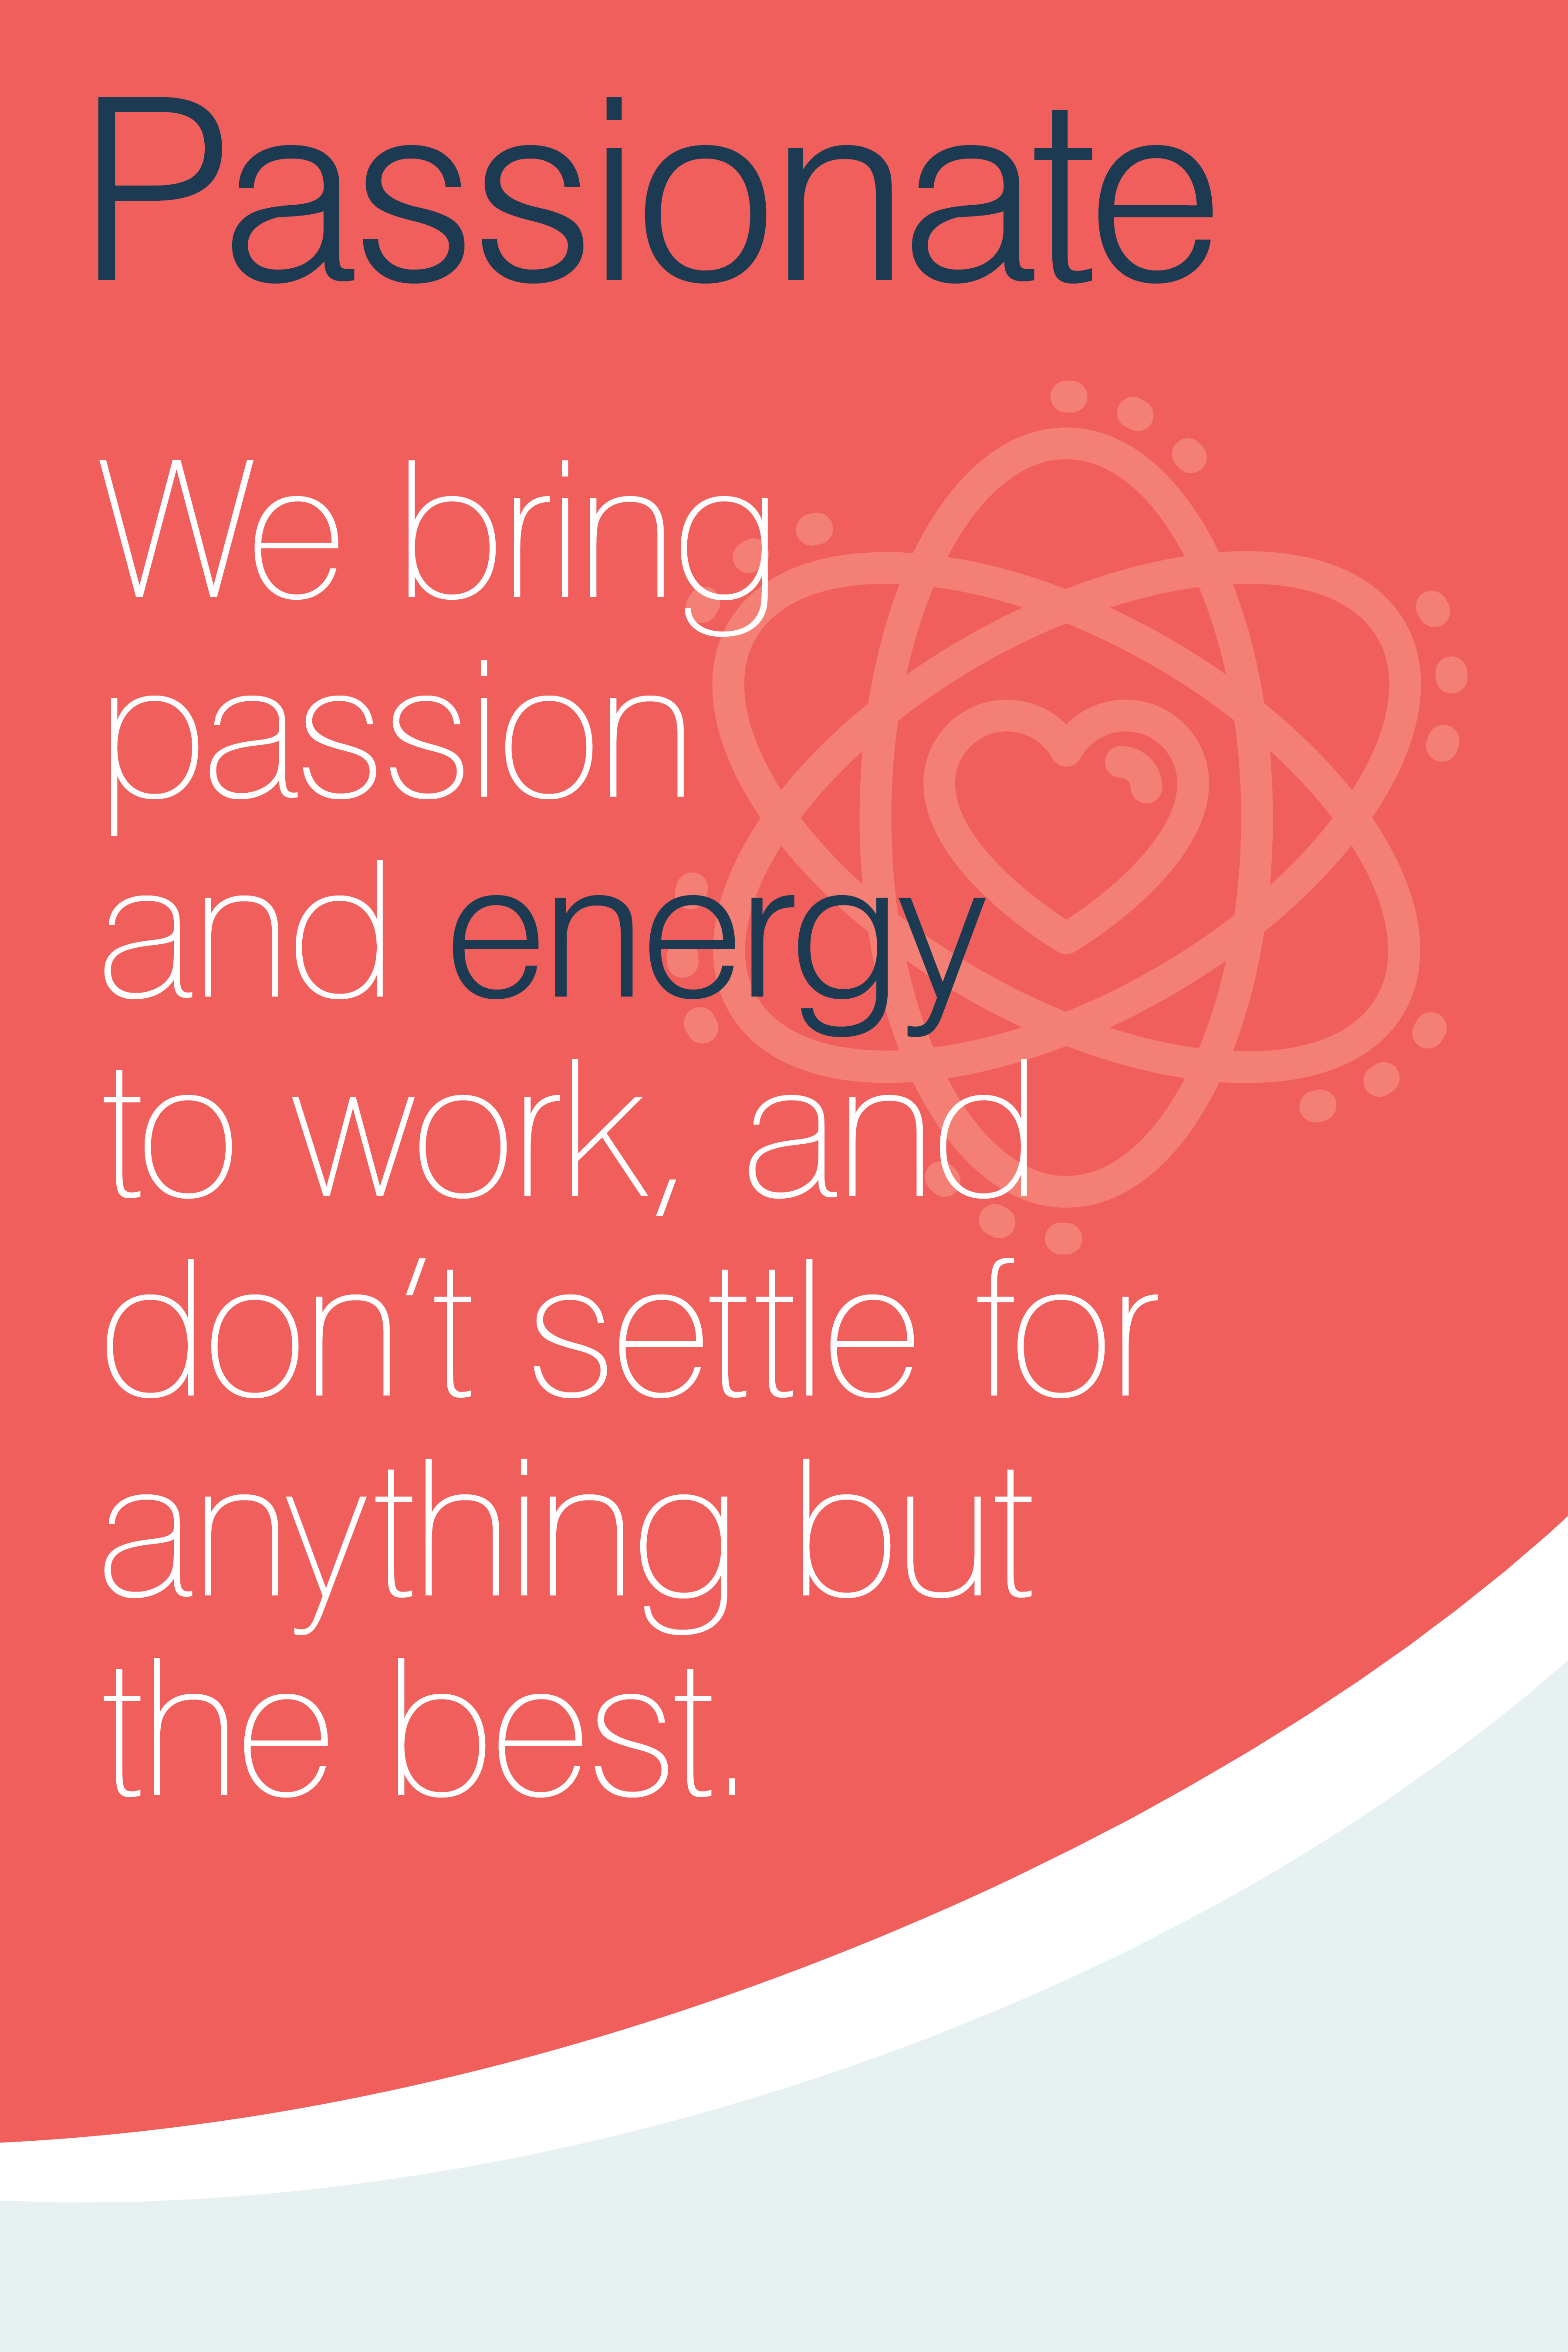 Poster text: We bring passion and energy to work, don't settle for anything but the best.